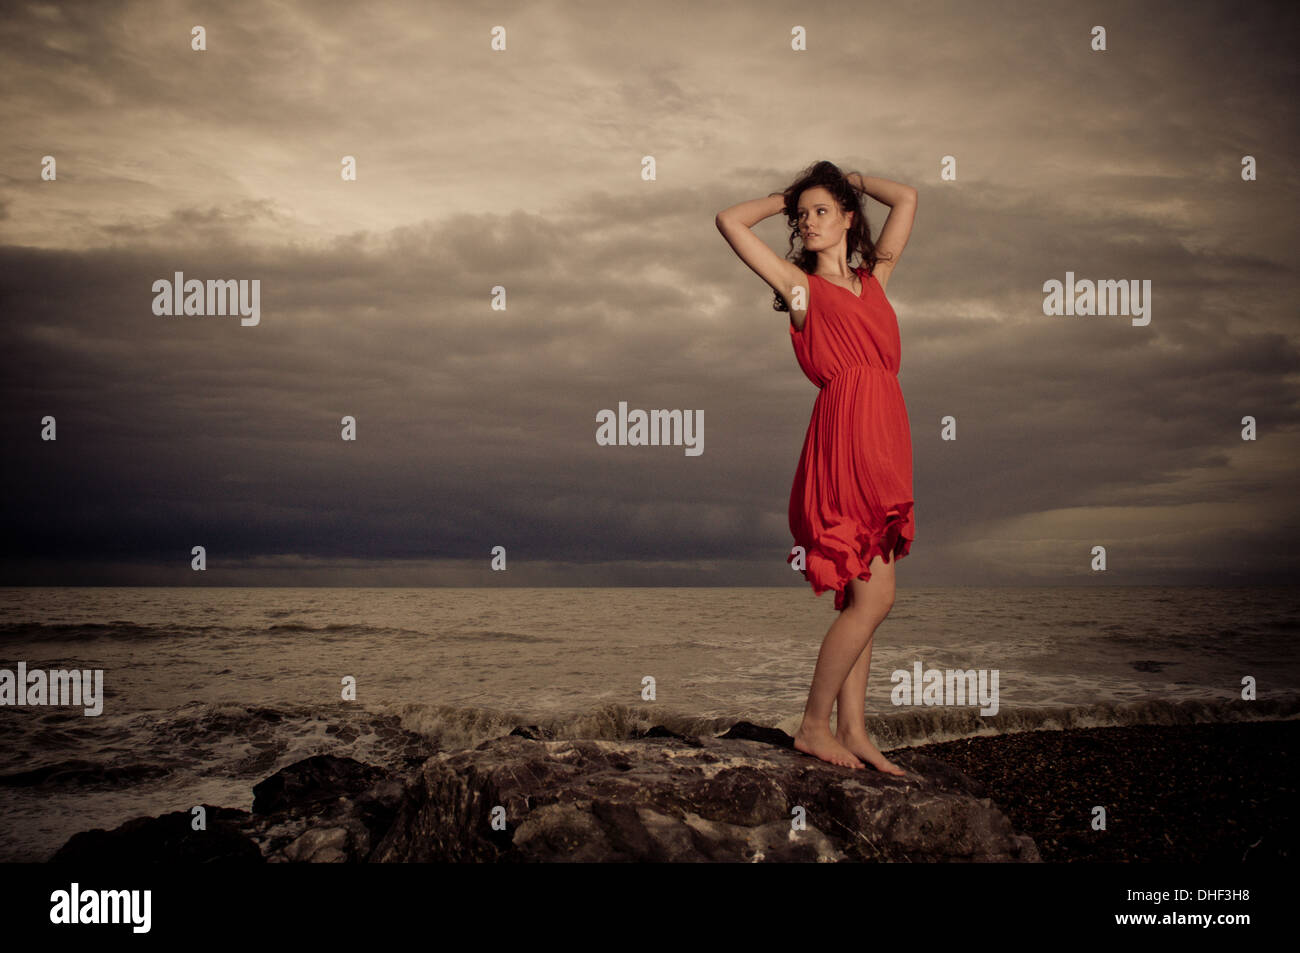 Brunette model on rocky beach during a storm Stock Photo